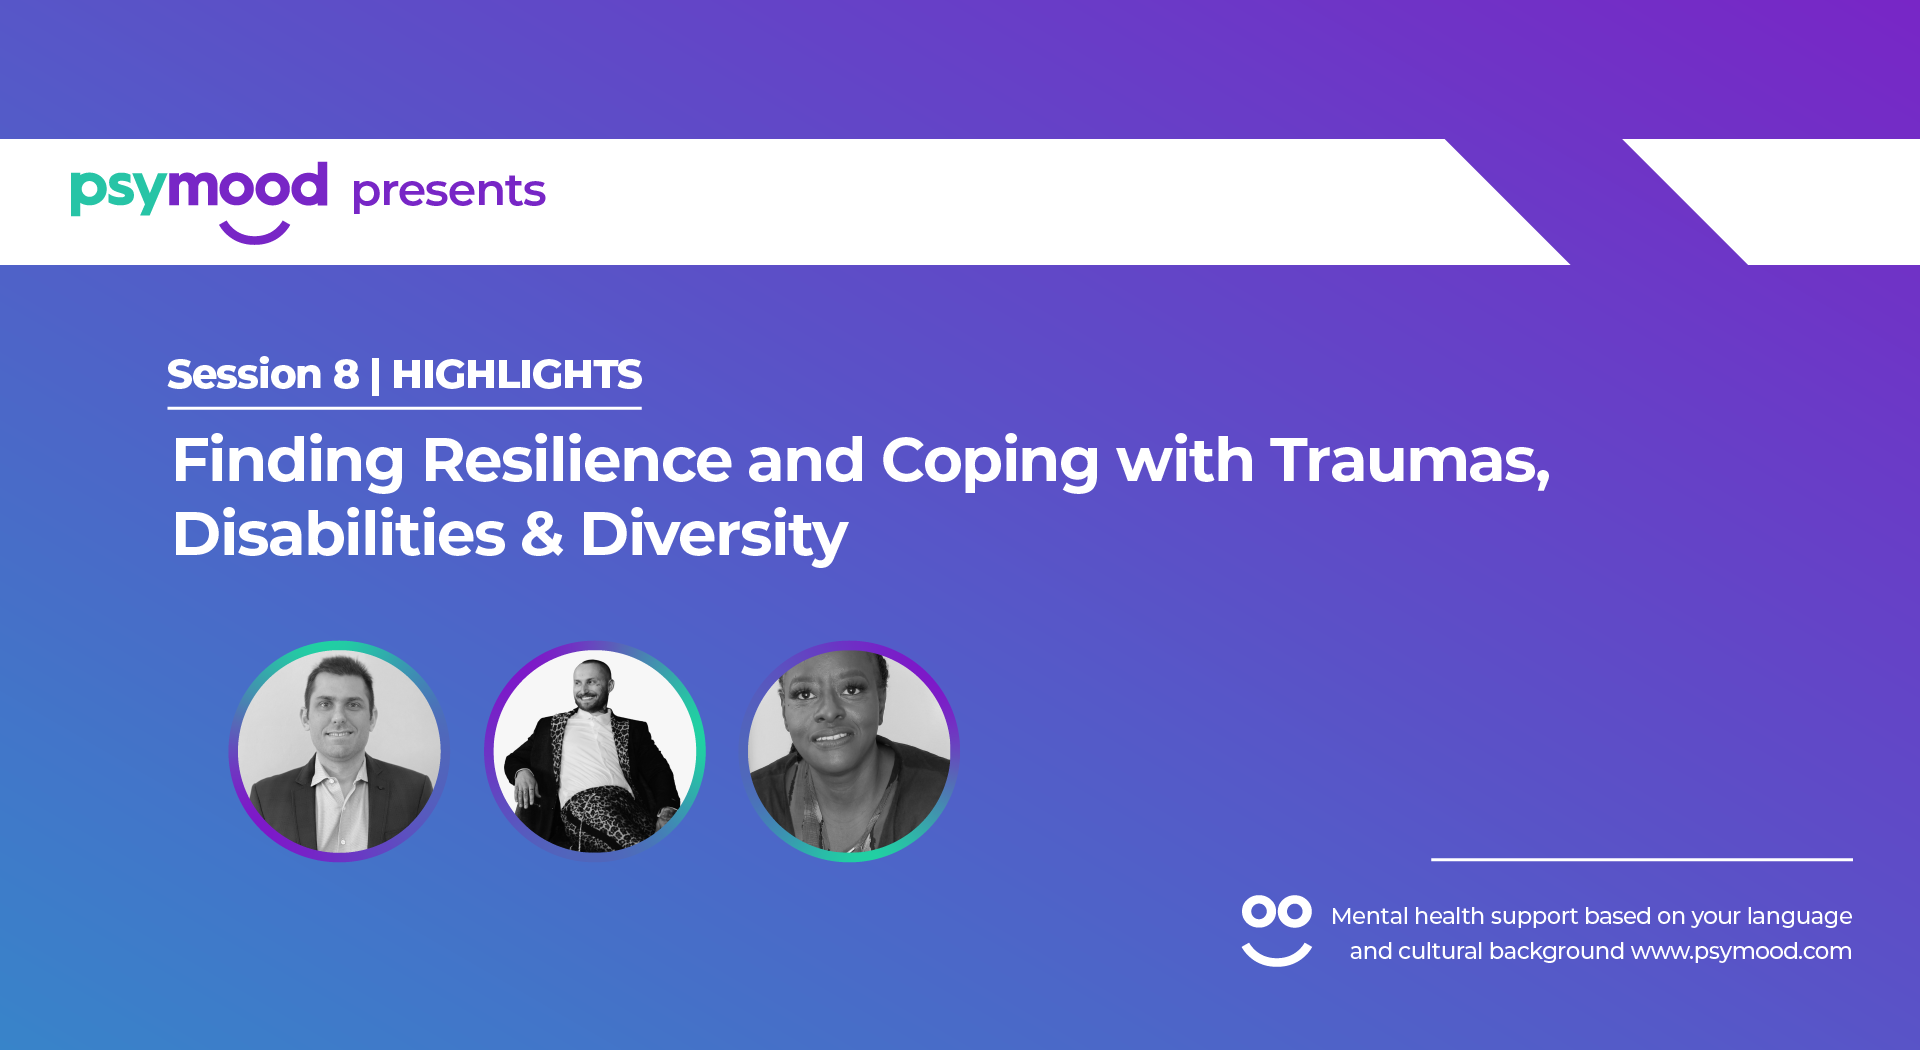 Finding Resilience and Coping with Traumas – Session Highlights